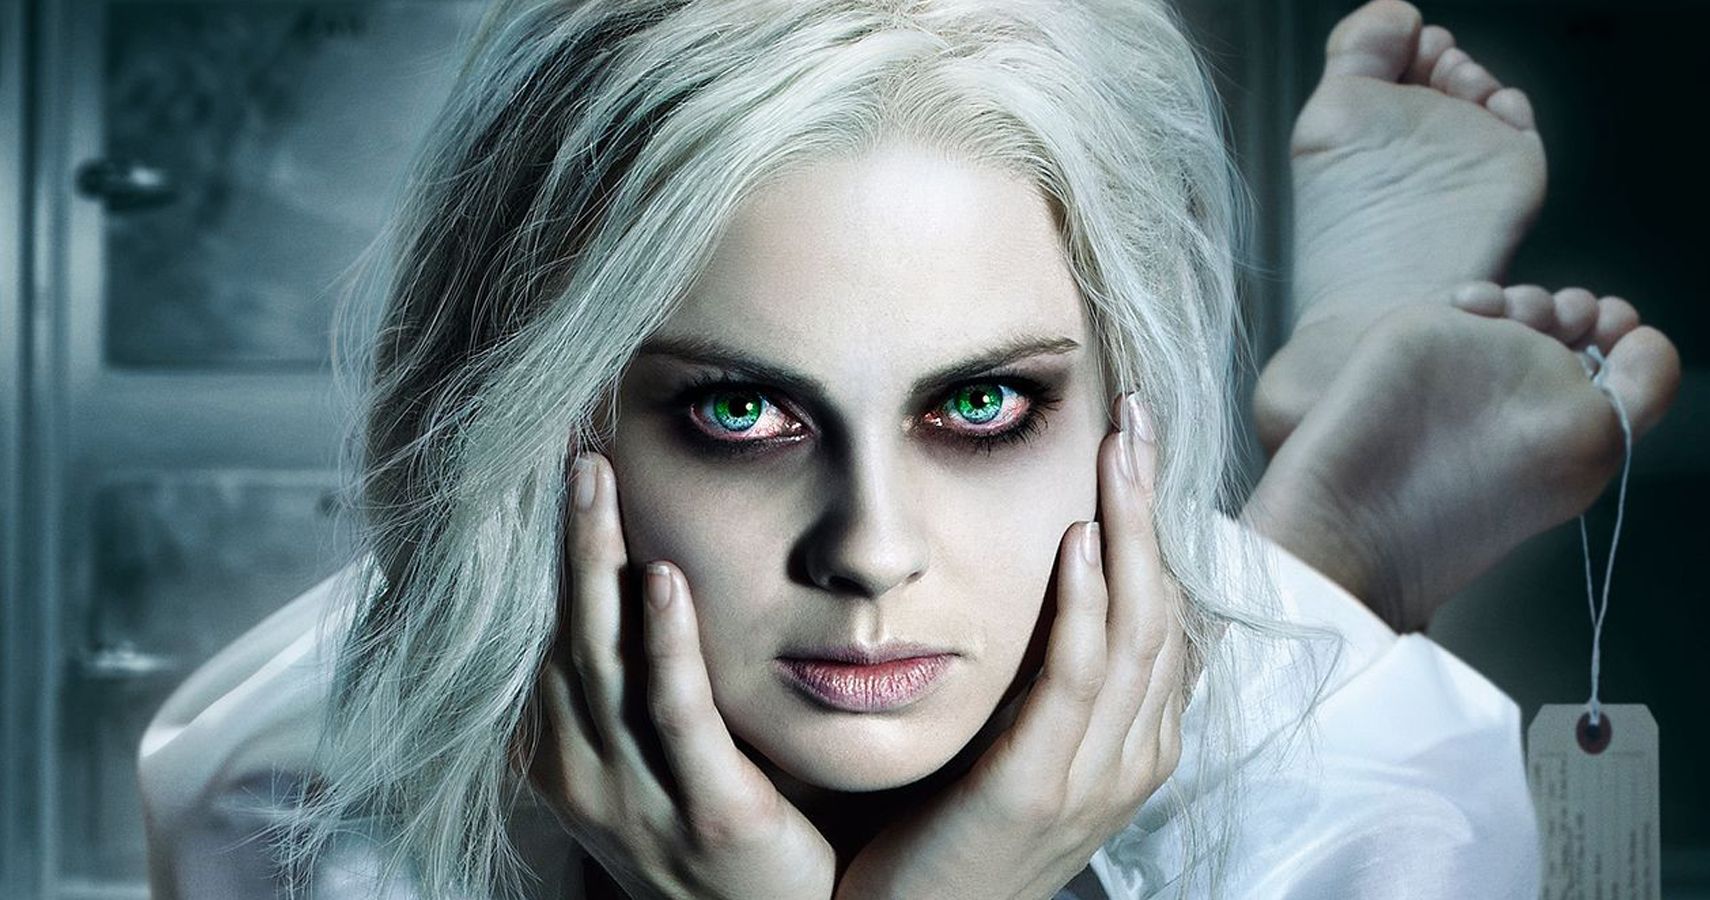 iZombie 5 Characters Who Got Fitting Endings (& 5 Who Deserved More)